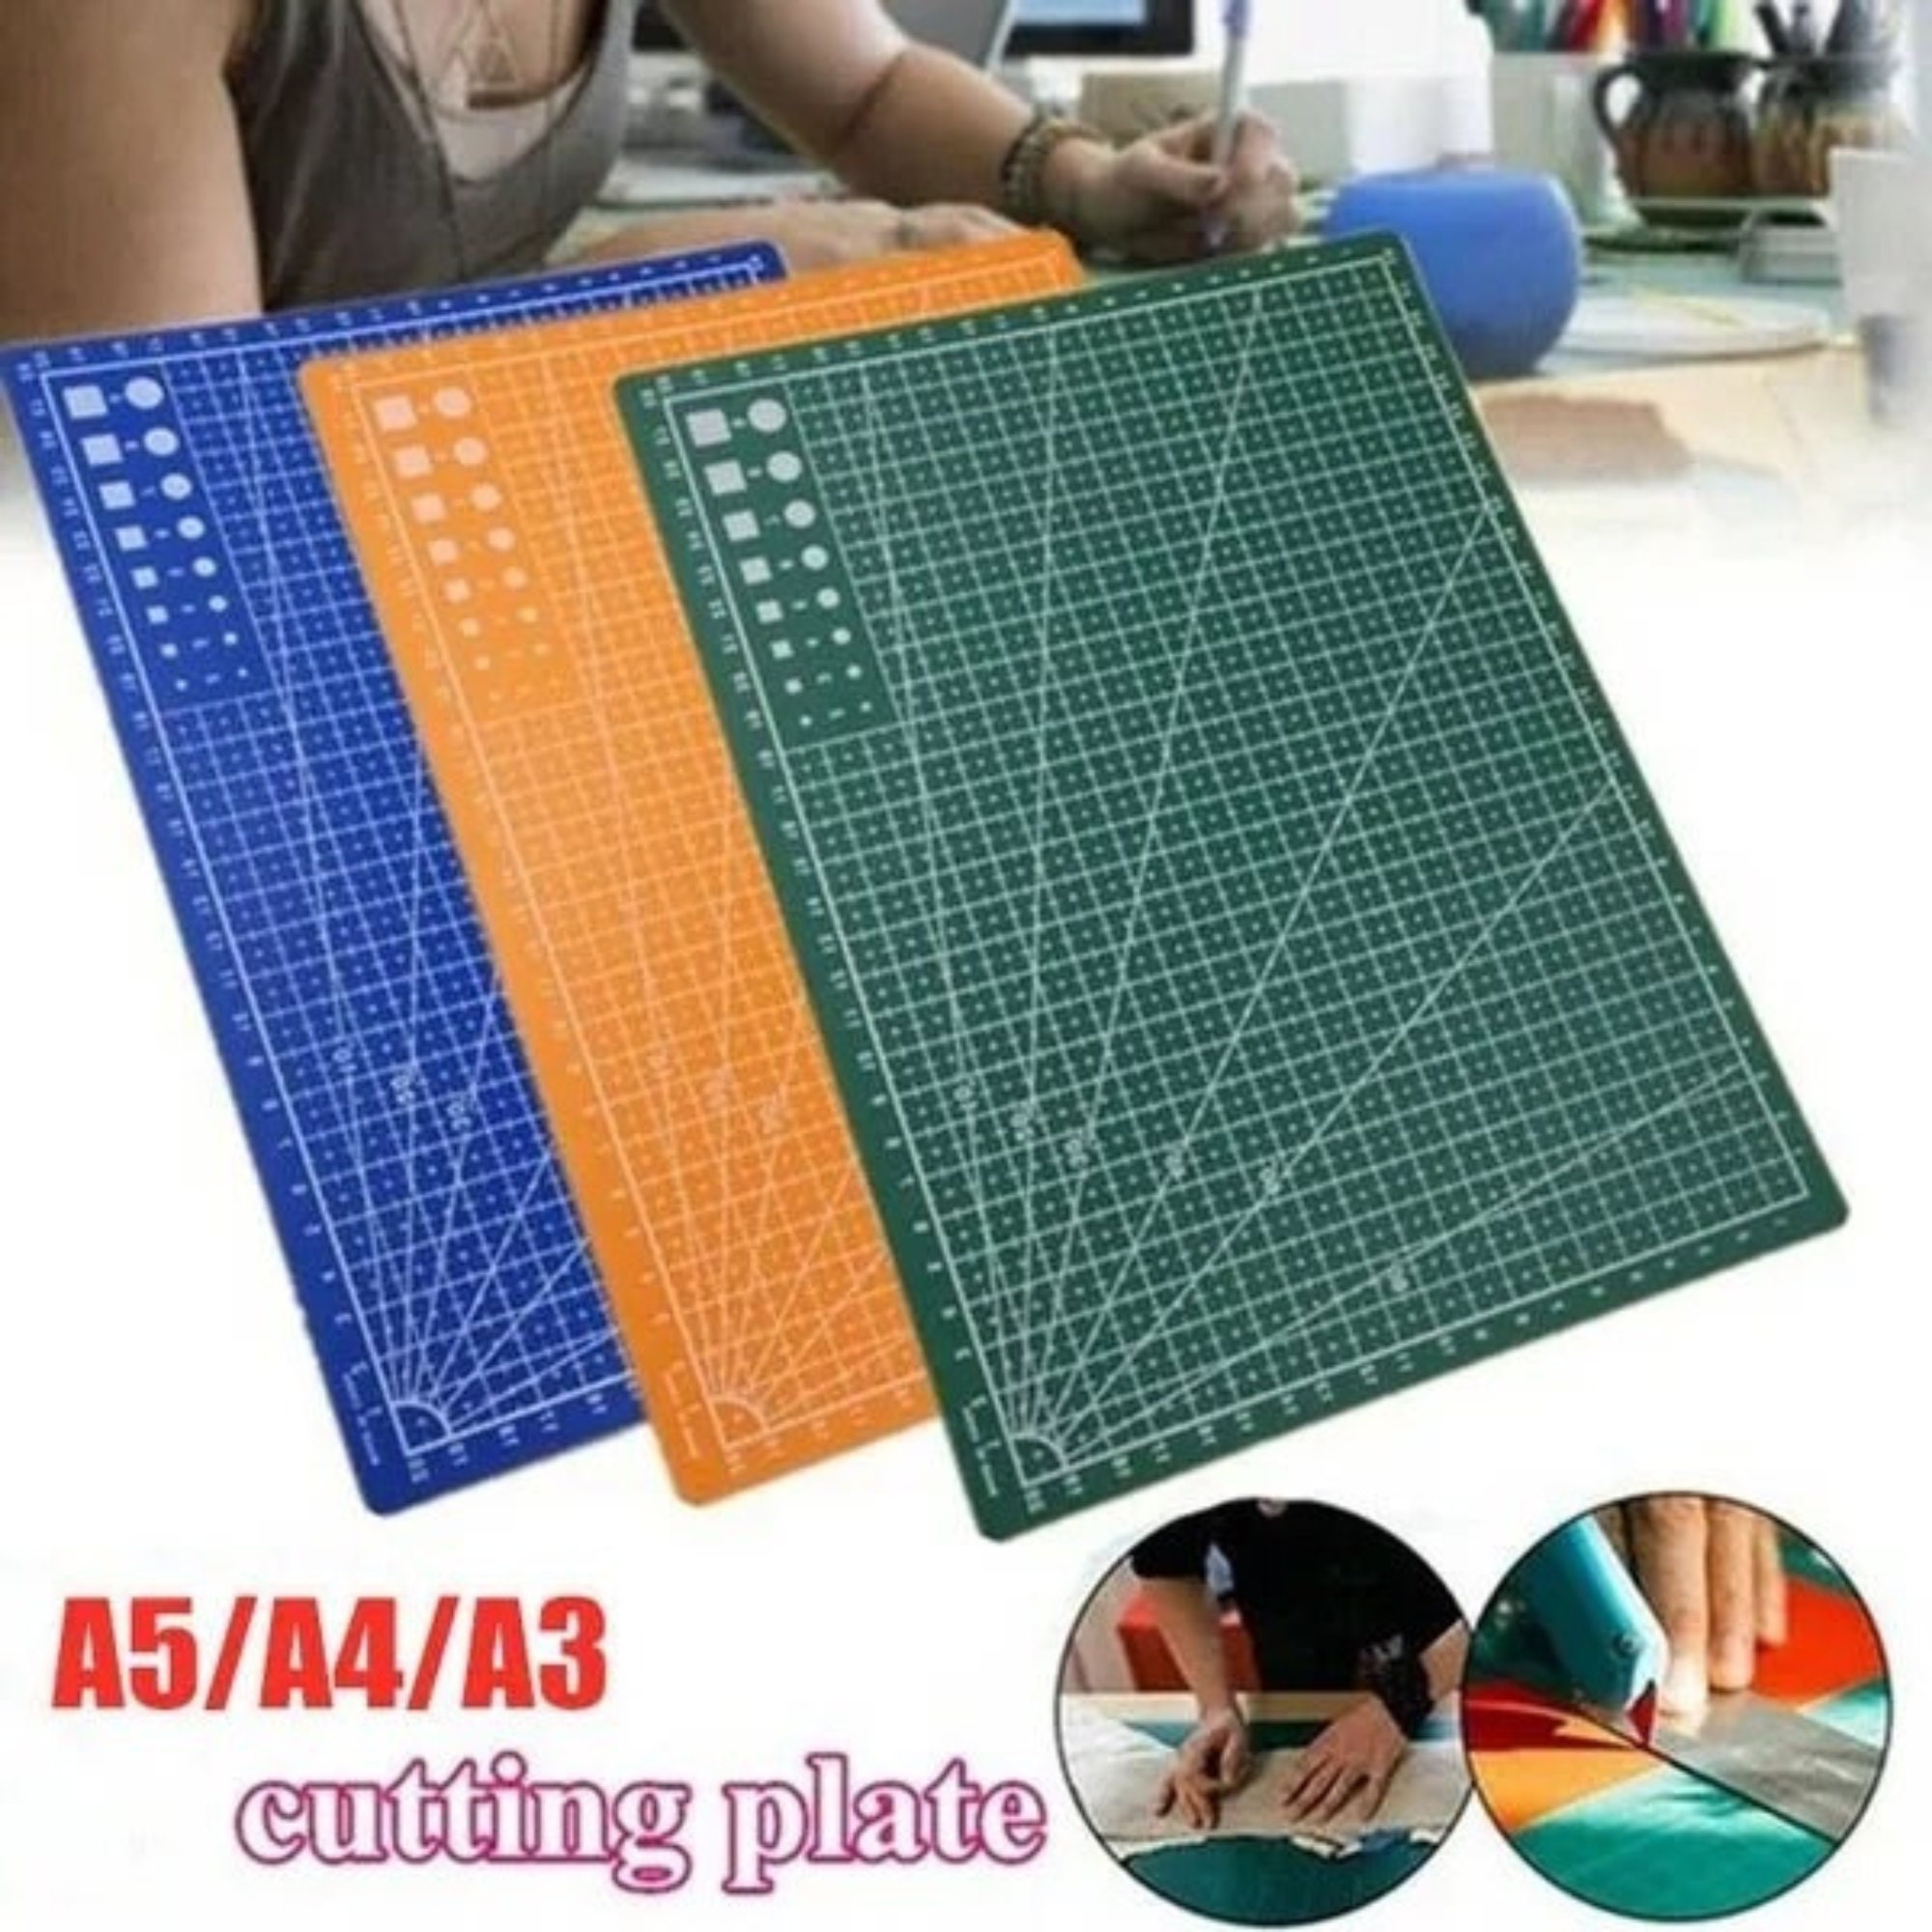 2 Options of We R Memory Keepers Punch Board Tab Punch / DIY Party Board  DIY Folder Index/party Treats Bags Maker/party Hats Maker 